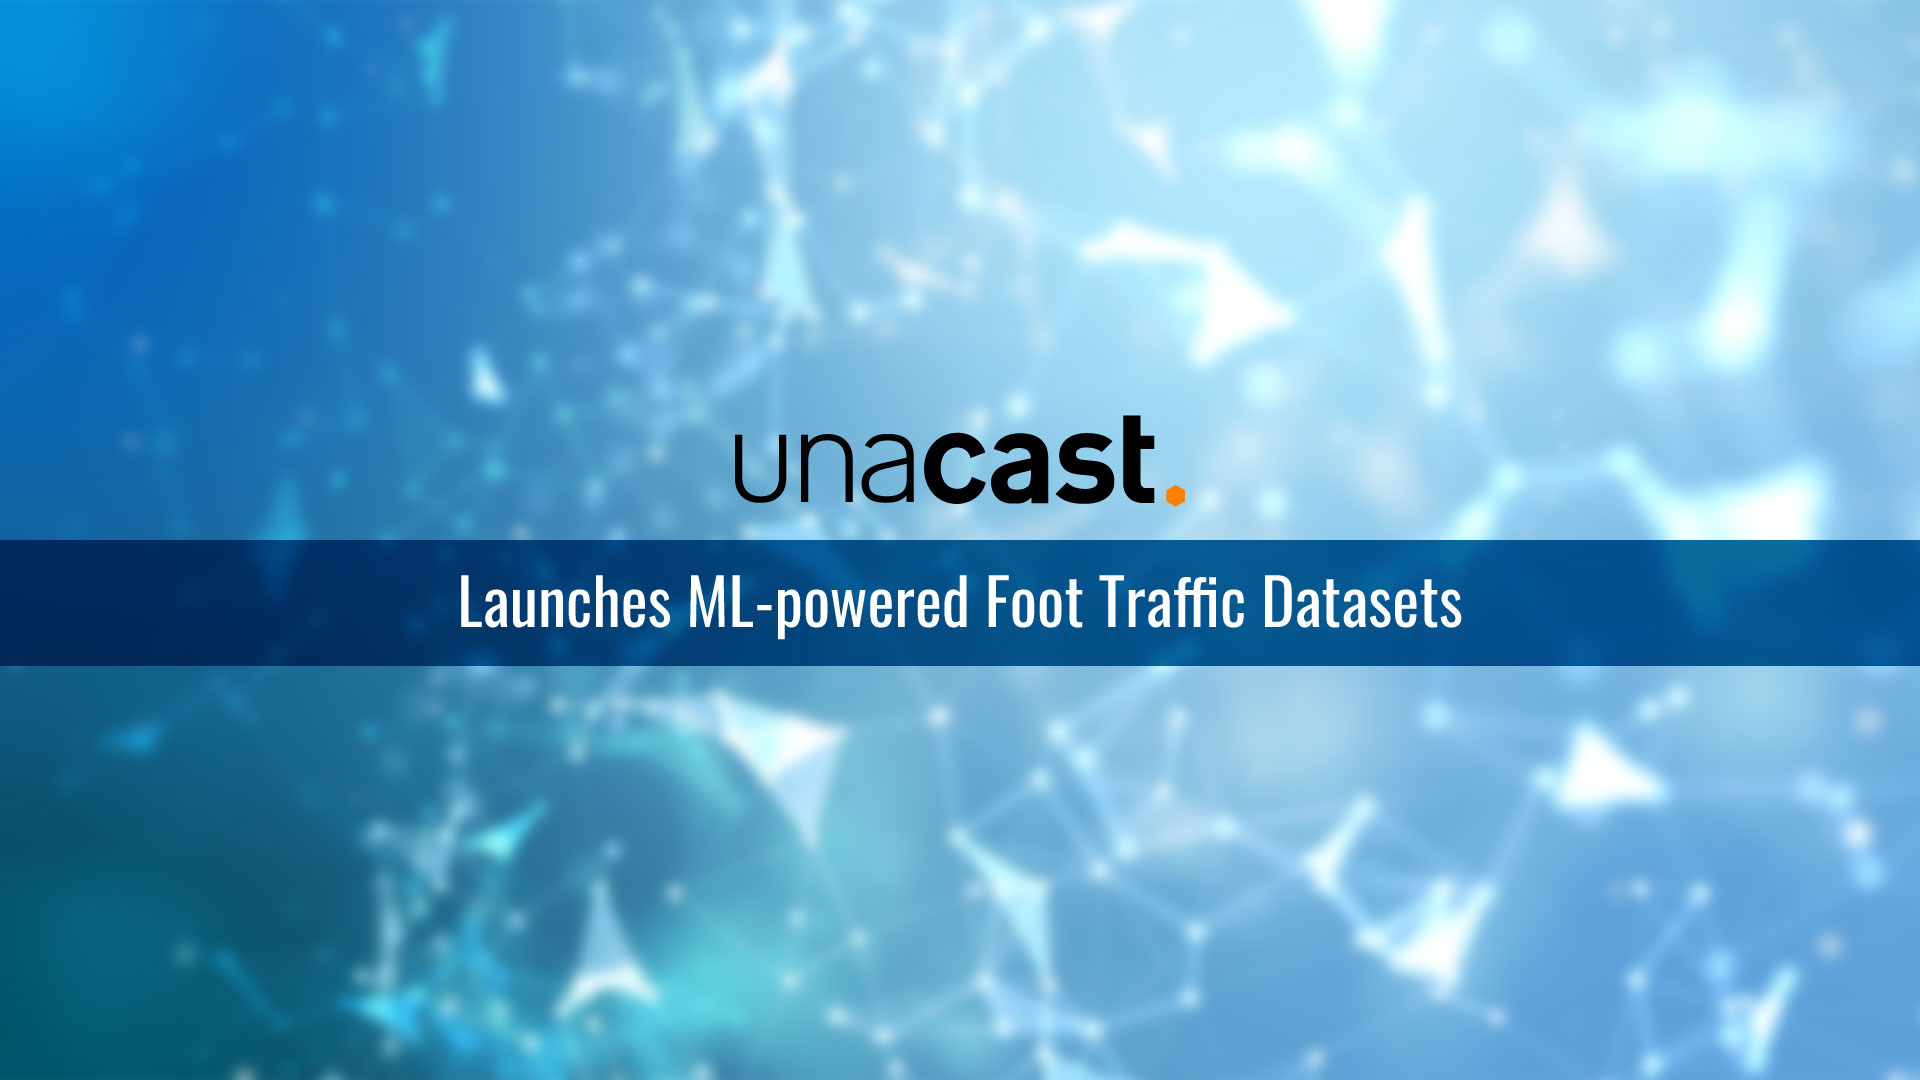 Unacast launches new machine learning powered Foot Traffic Datasets